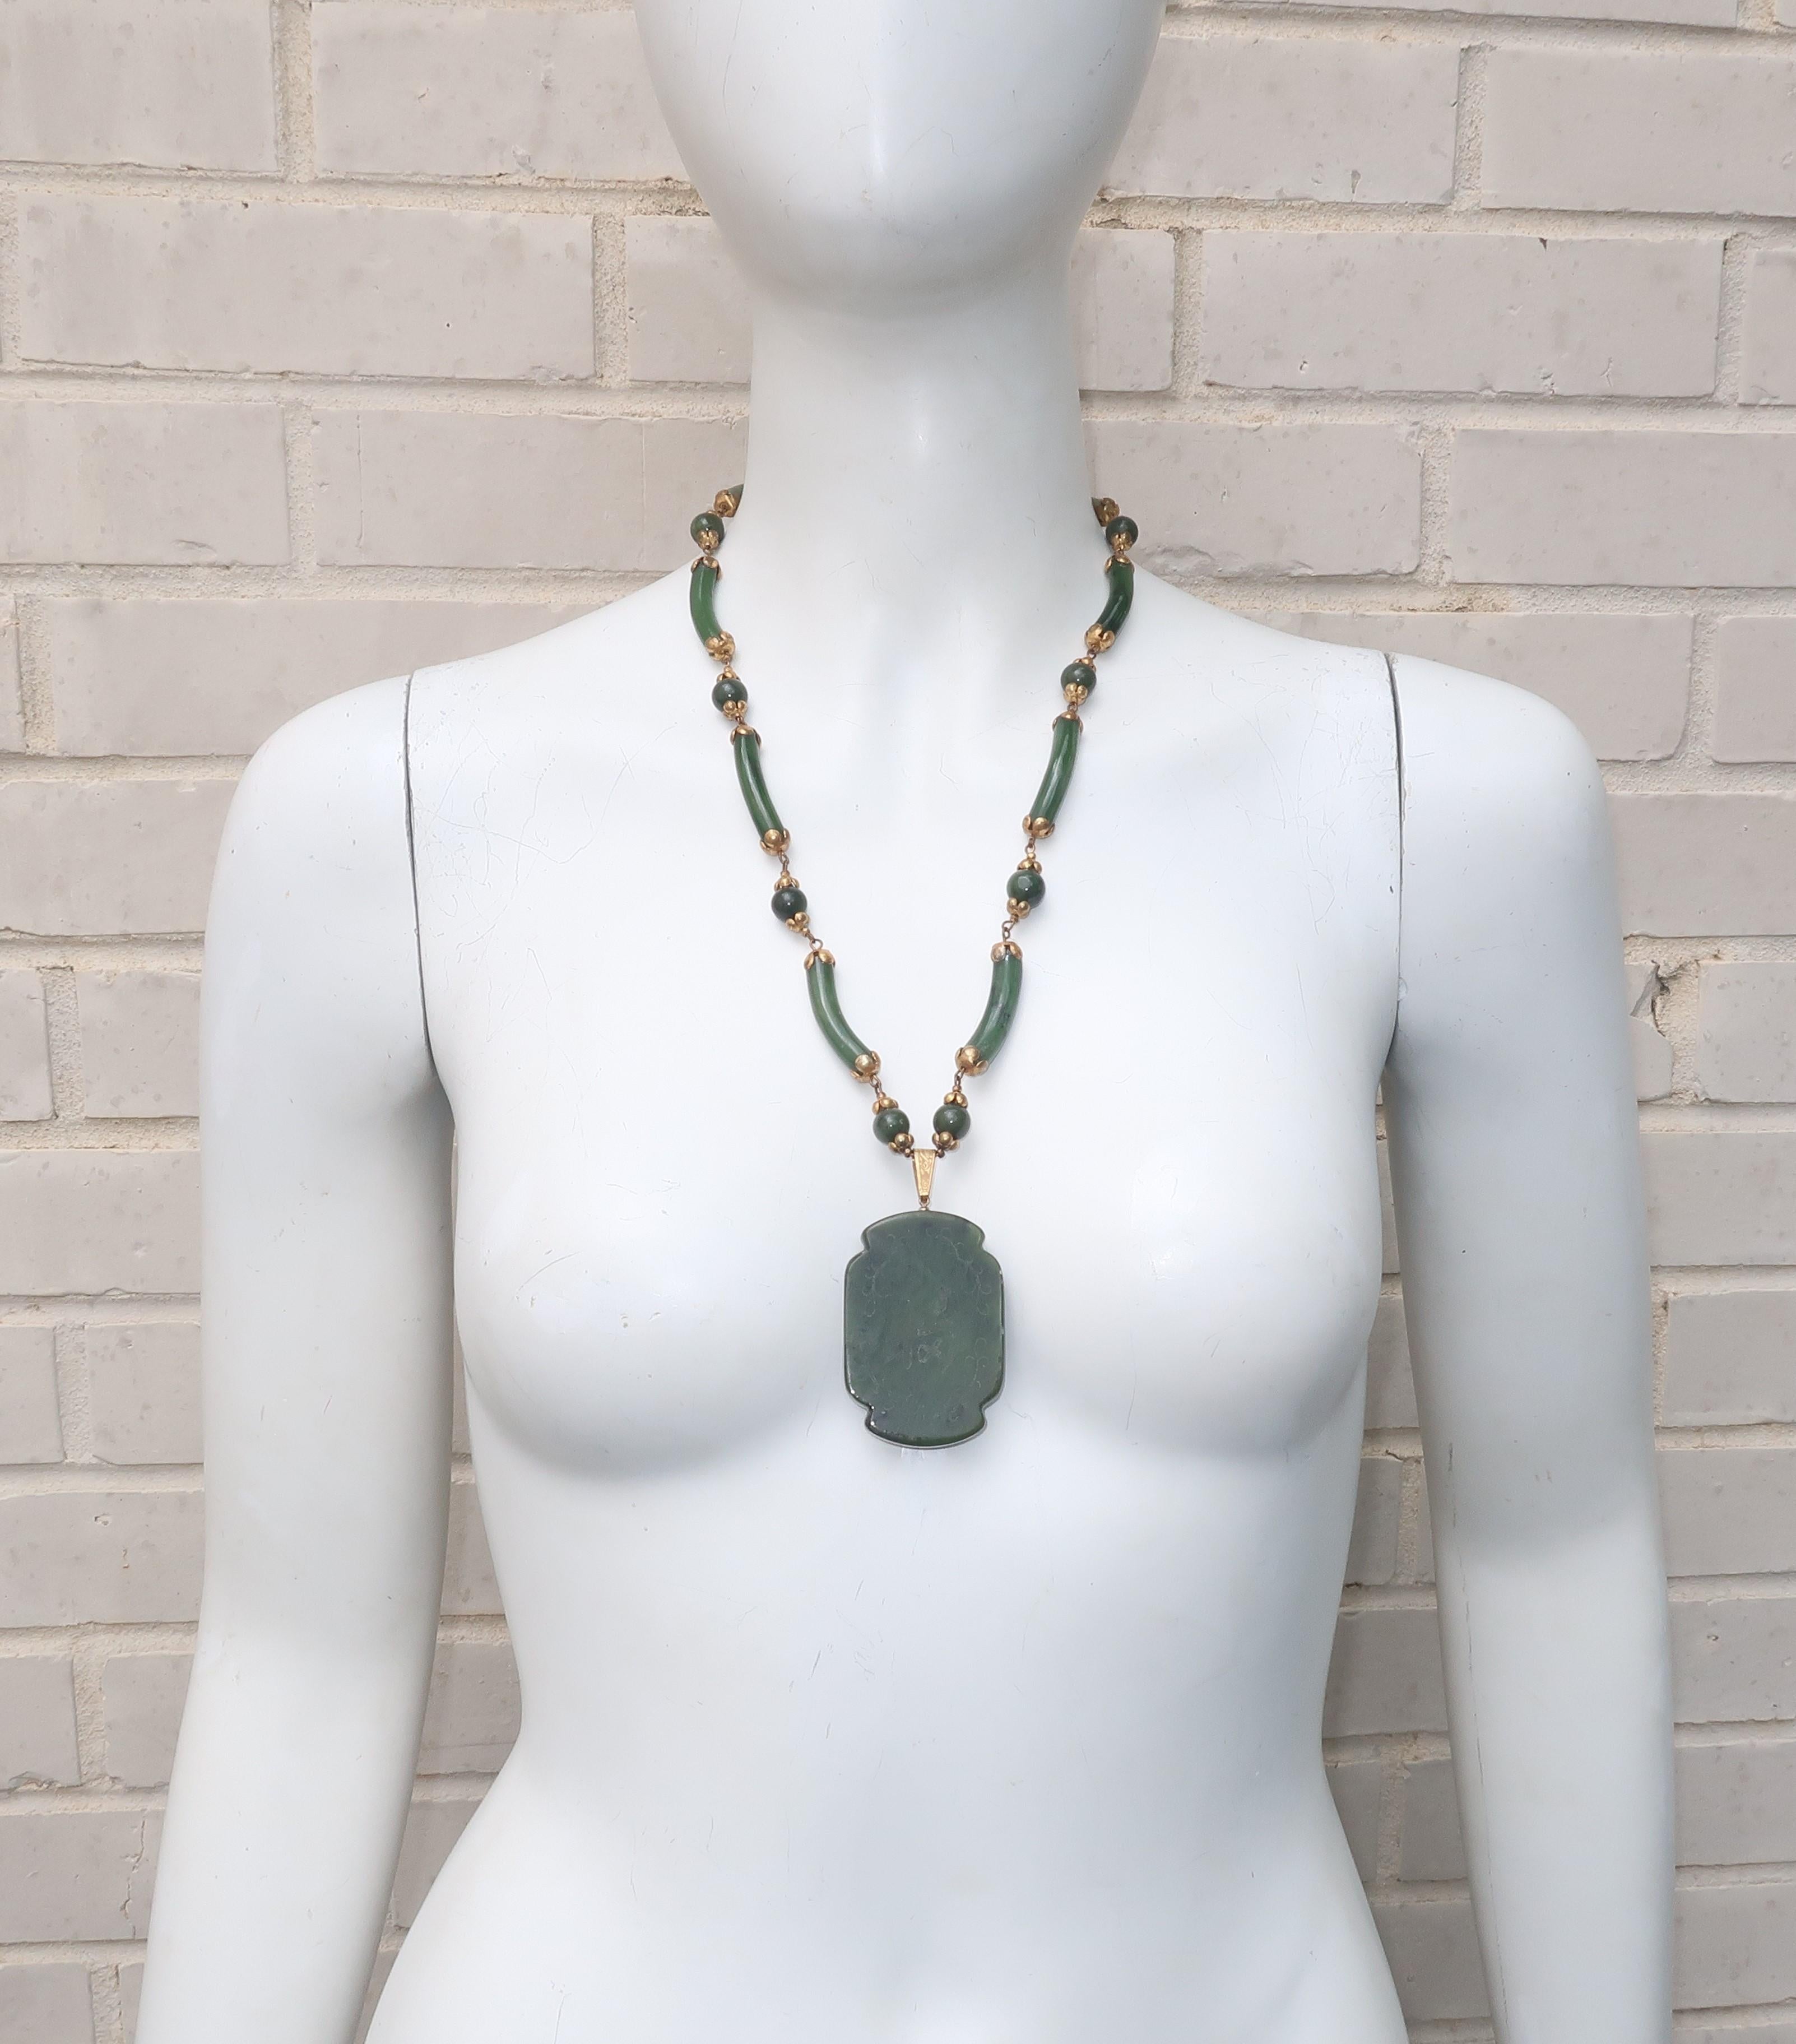 This 1950's Miriam Haskell 'spinach' green jade medallion necklace is reminiscent of 1920's Art Deco jewelry with an exotic aesthetic.  The jade medallion is etched on one side with characters and the other side with a tranquil bucolic scene.  The